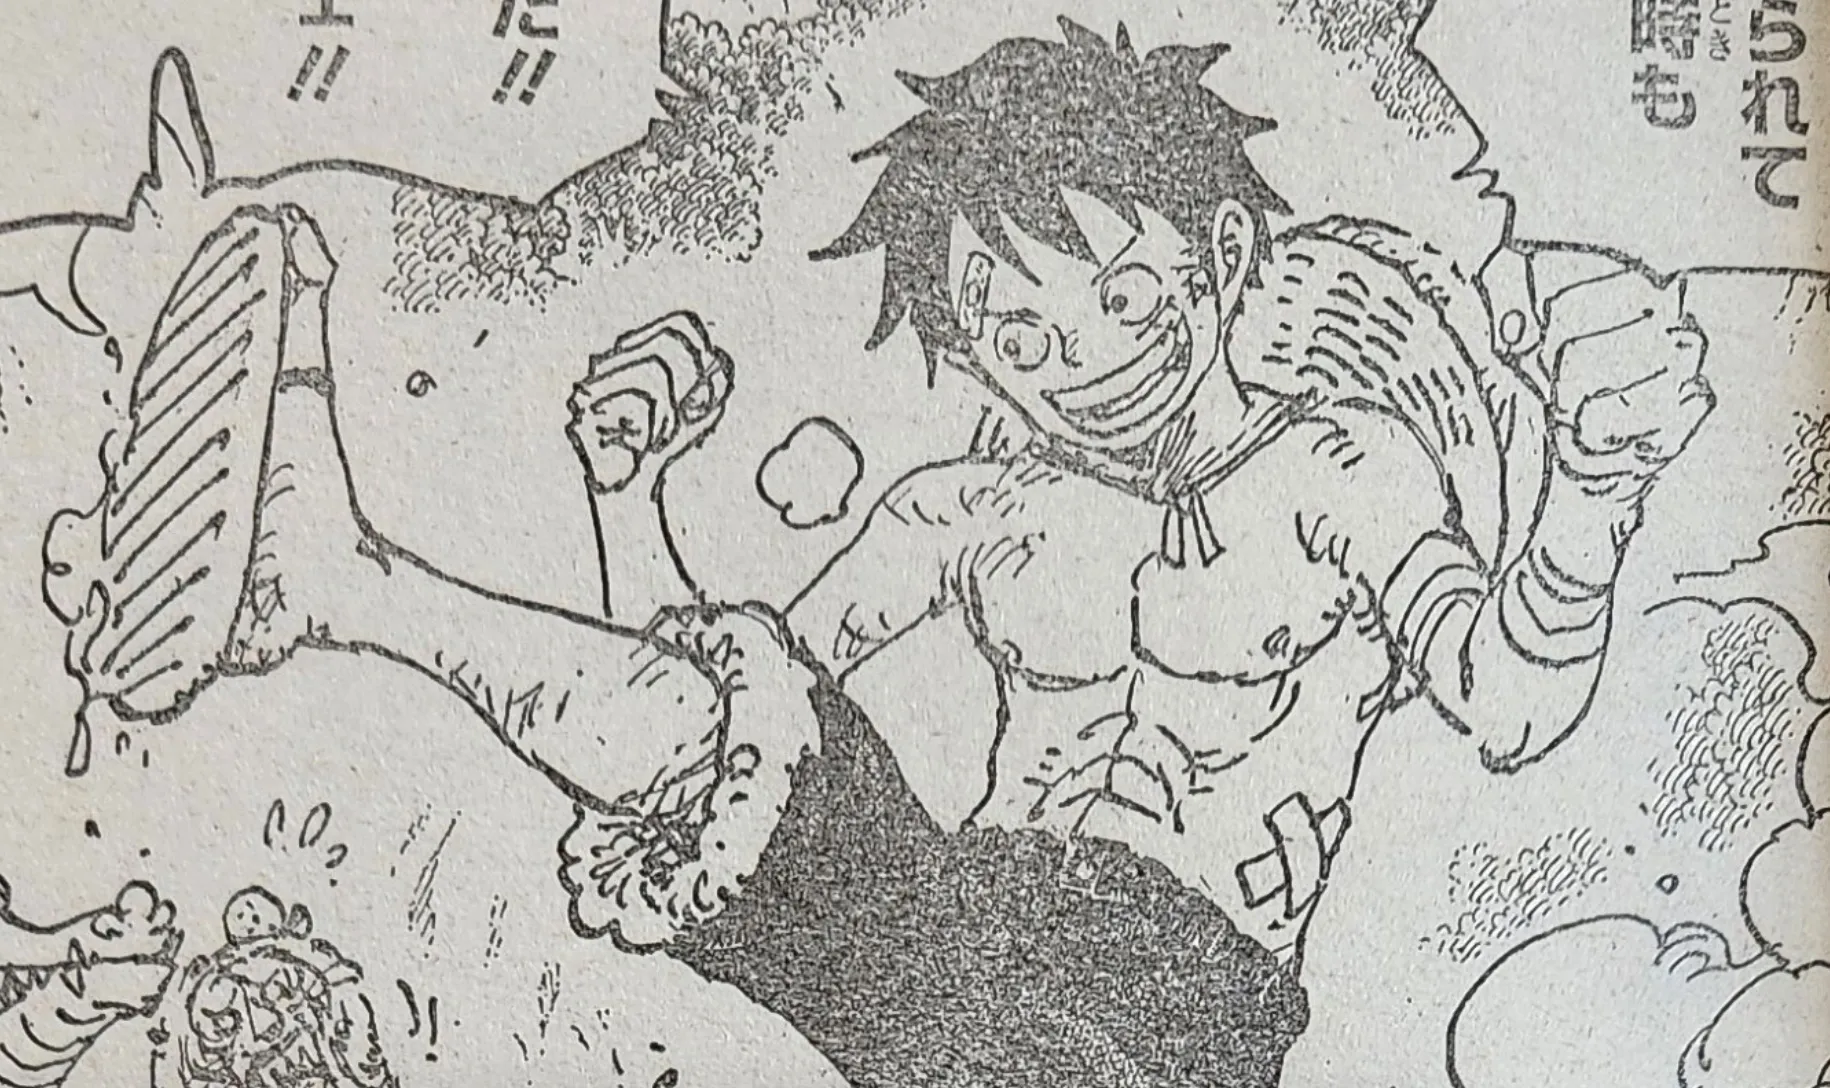 Spoiler - One Piece Chapter 1101 Spoiler Summaries and Images